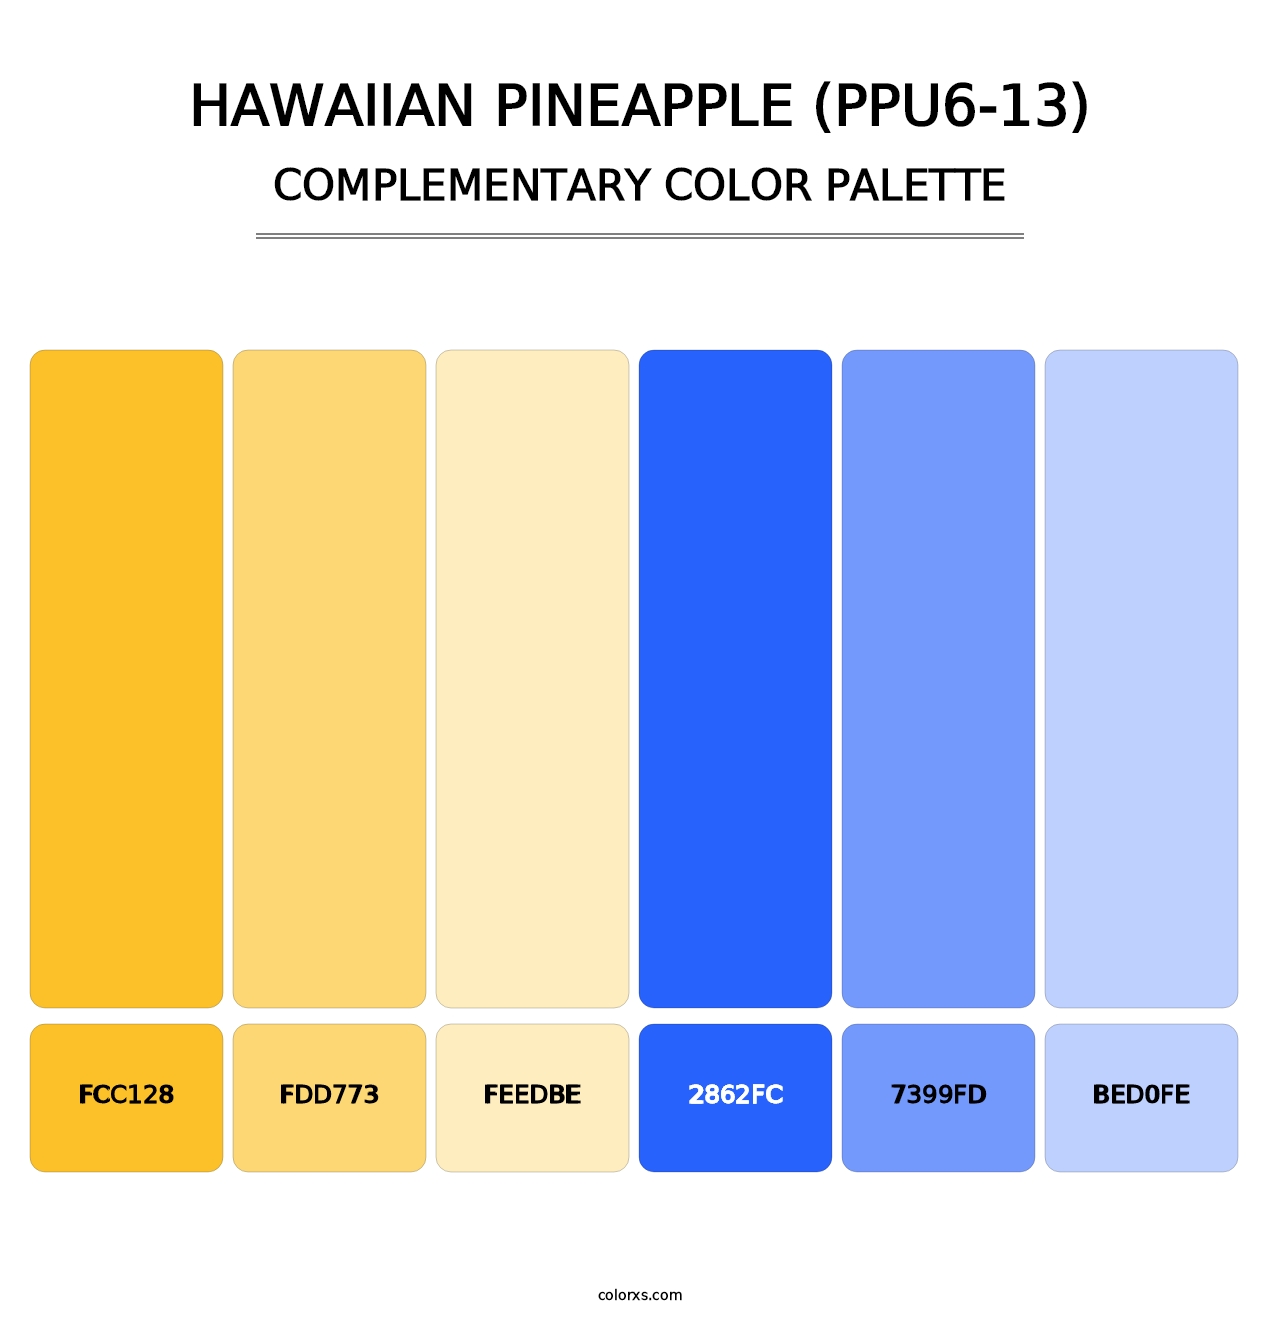 Hawaiian Pineapple (PPU6-13) - Complementary Color Palette